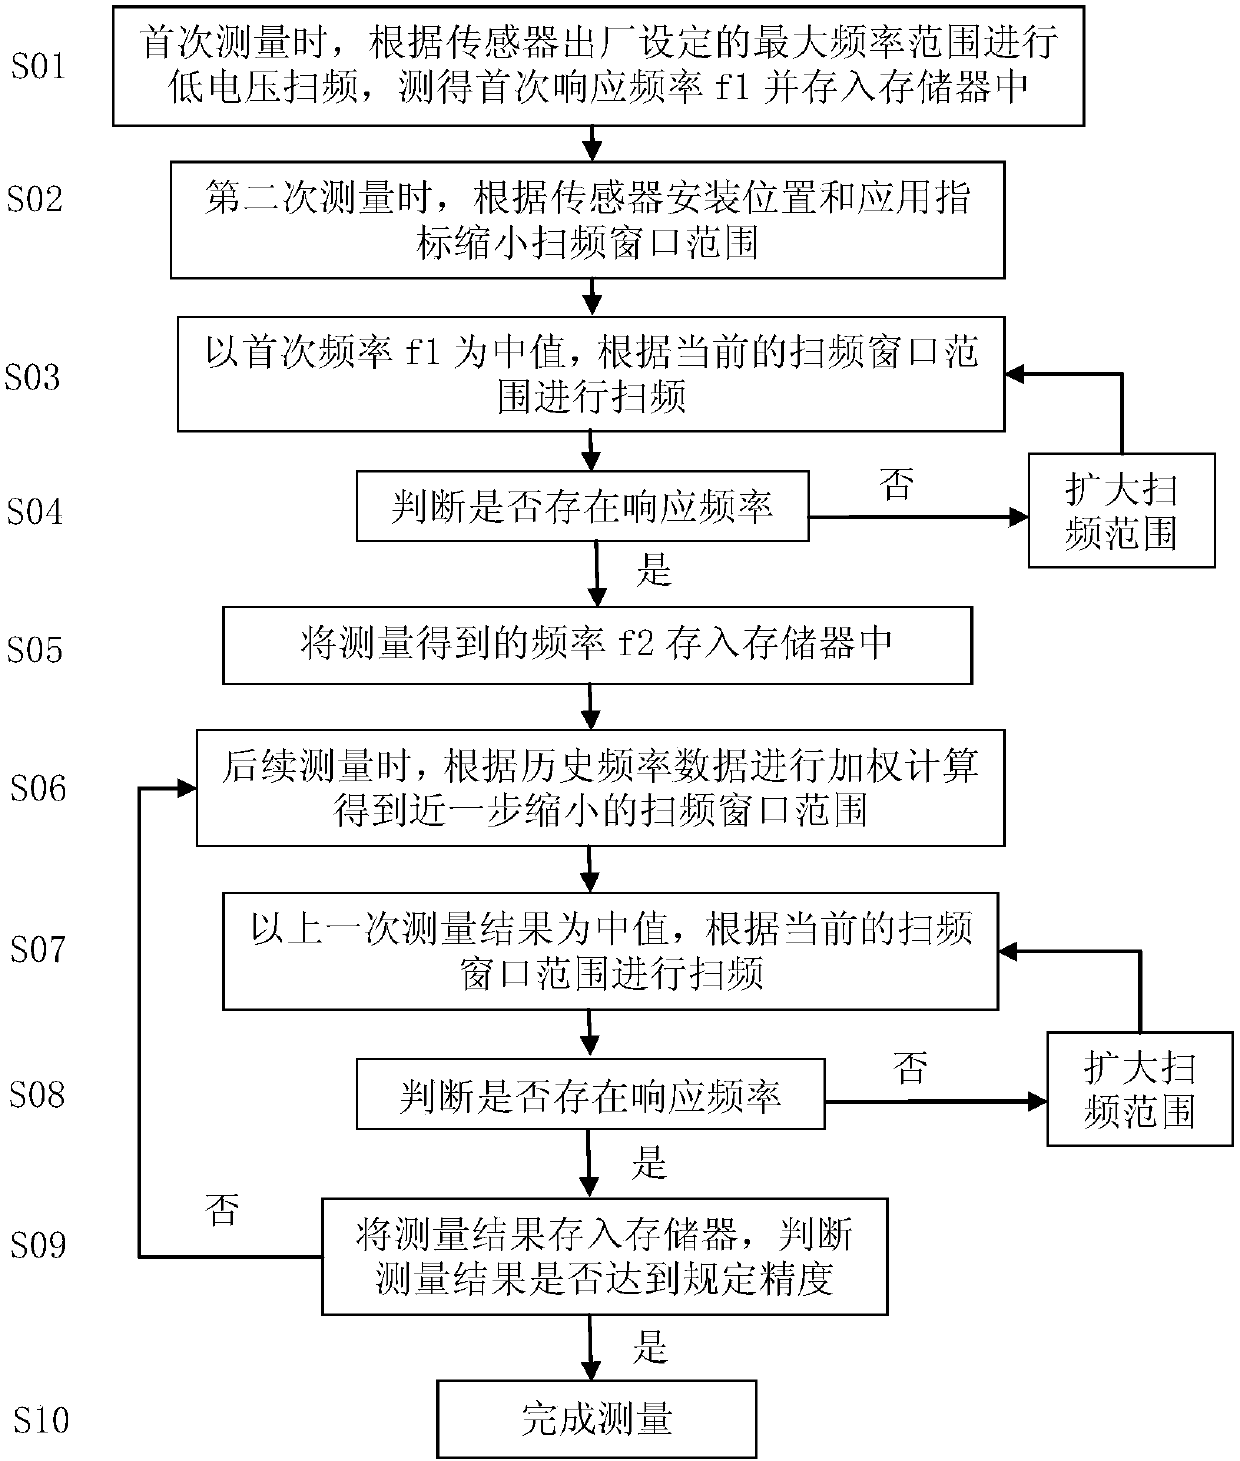 Frequency measuring method of vibrating wire type sensor